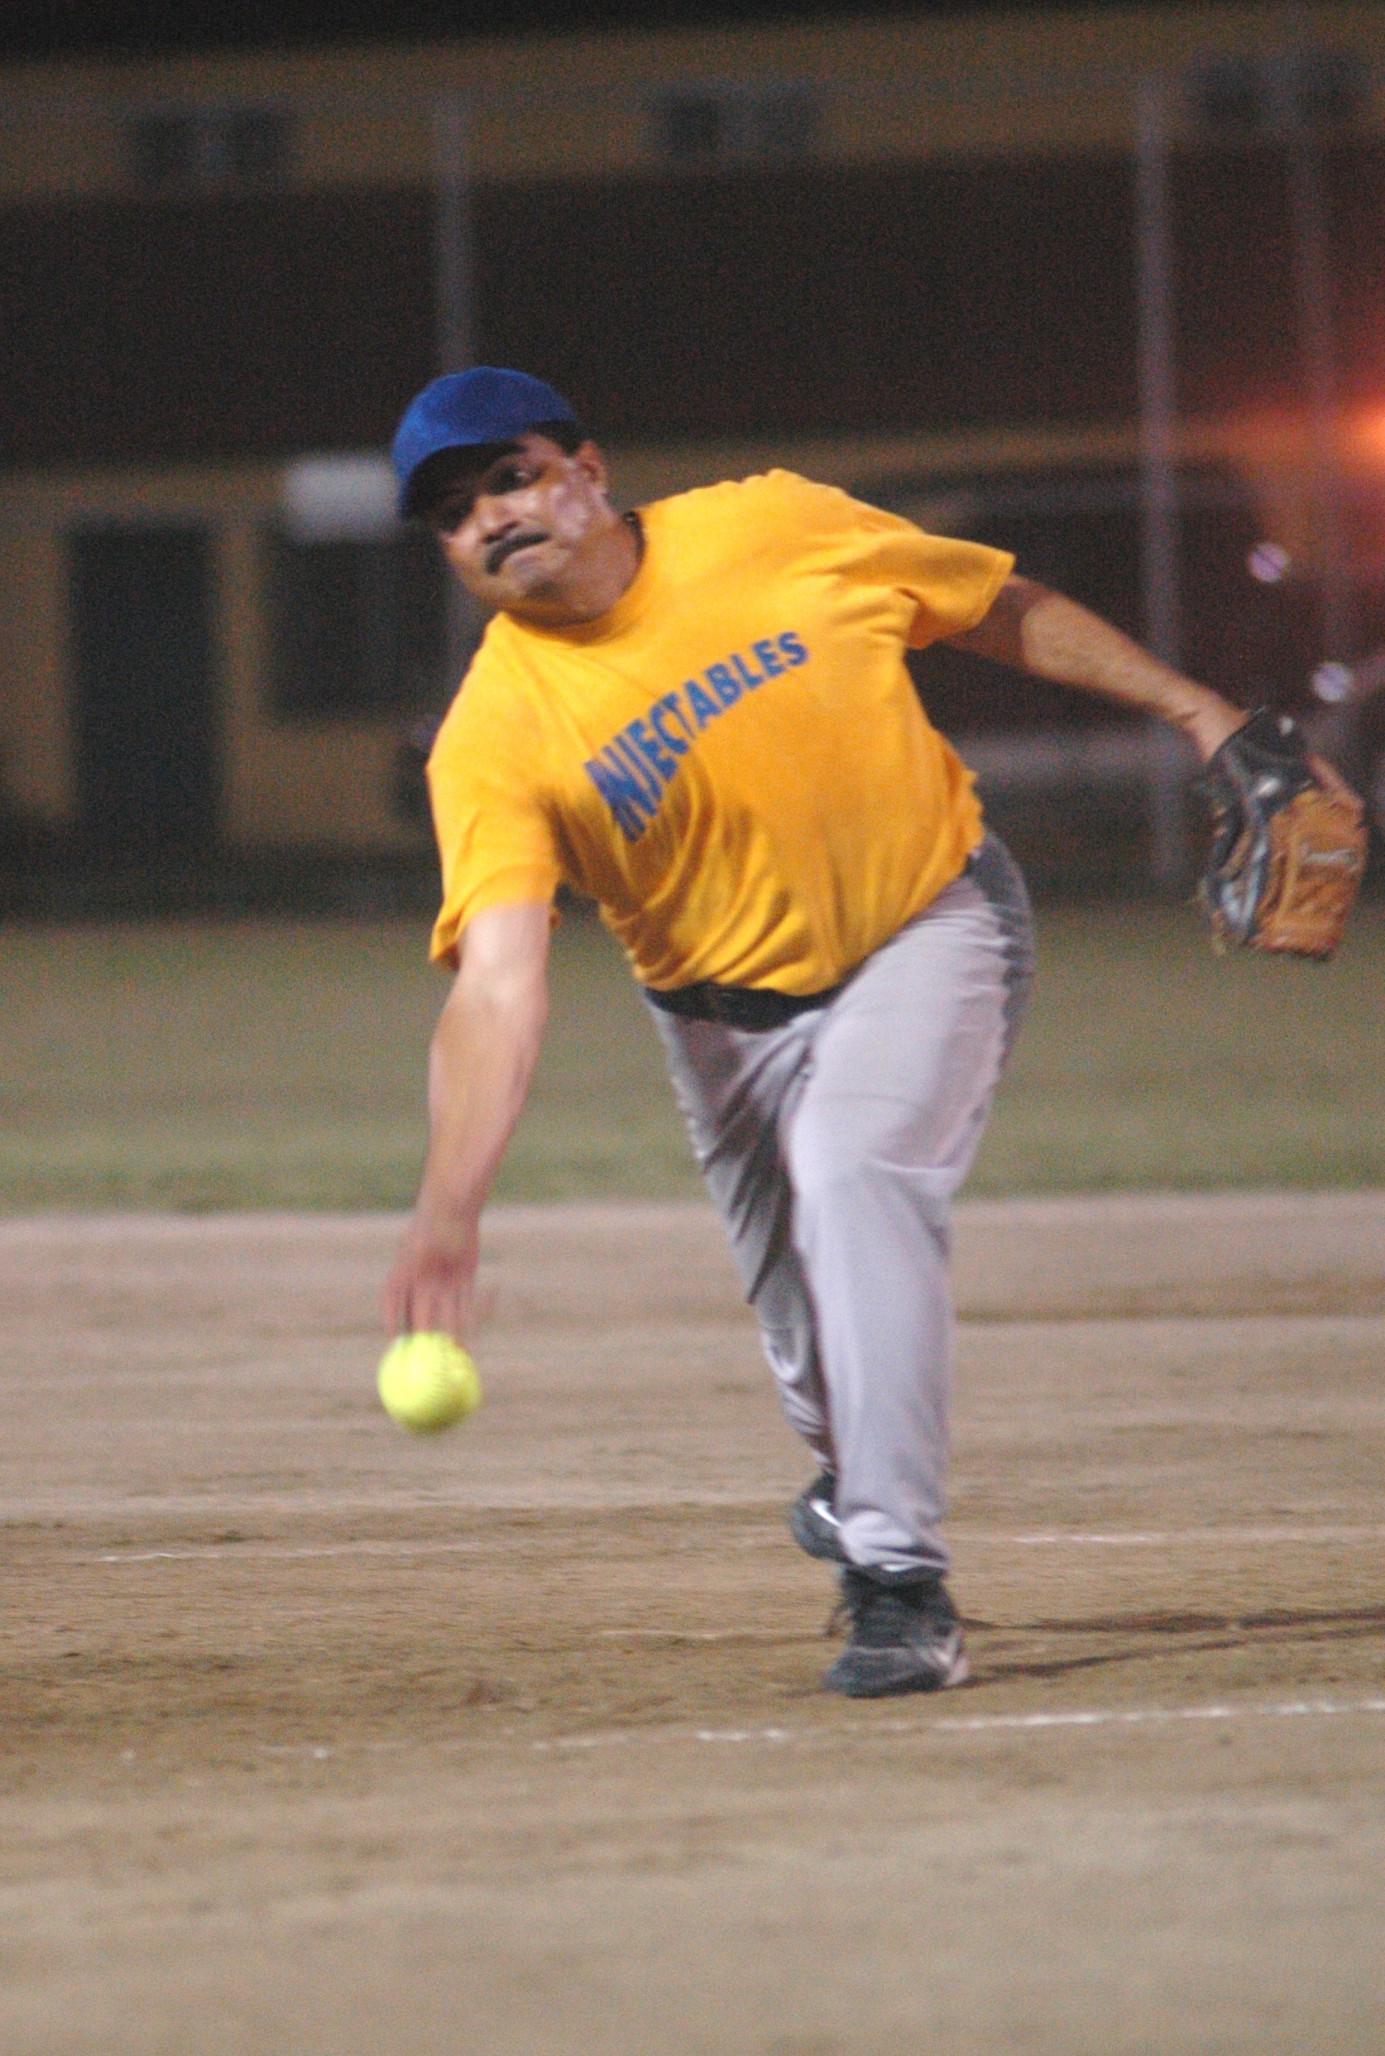 Injectables, Rebels Win Tuesday in G & I Softball League